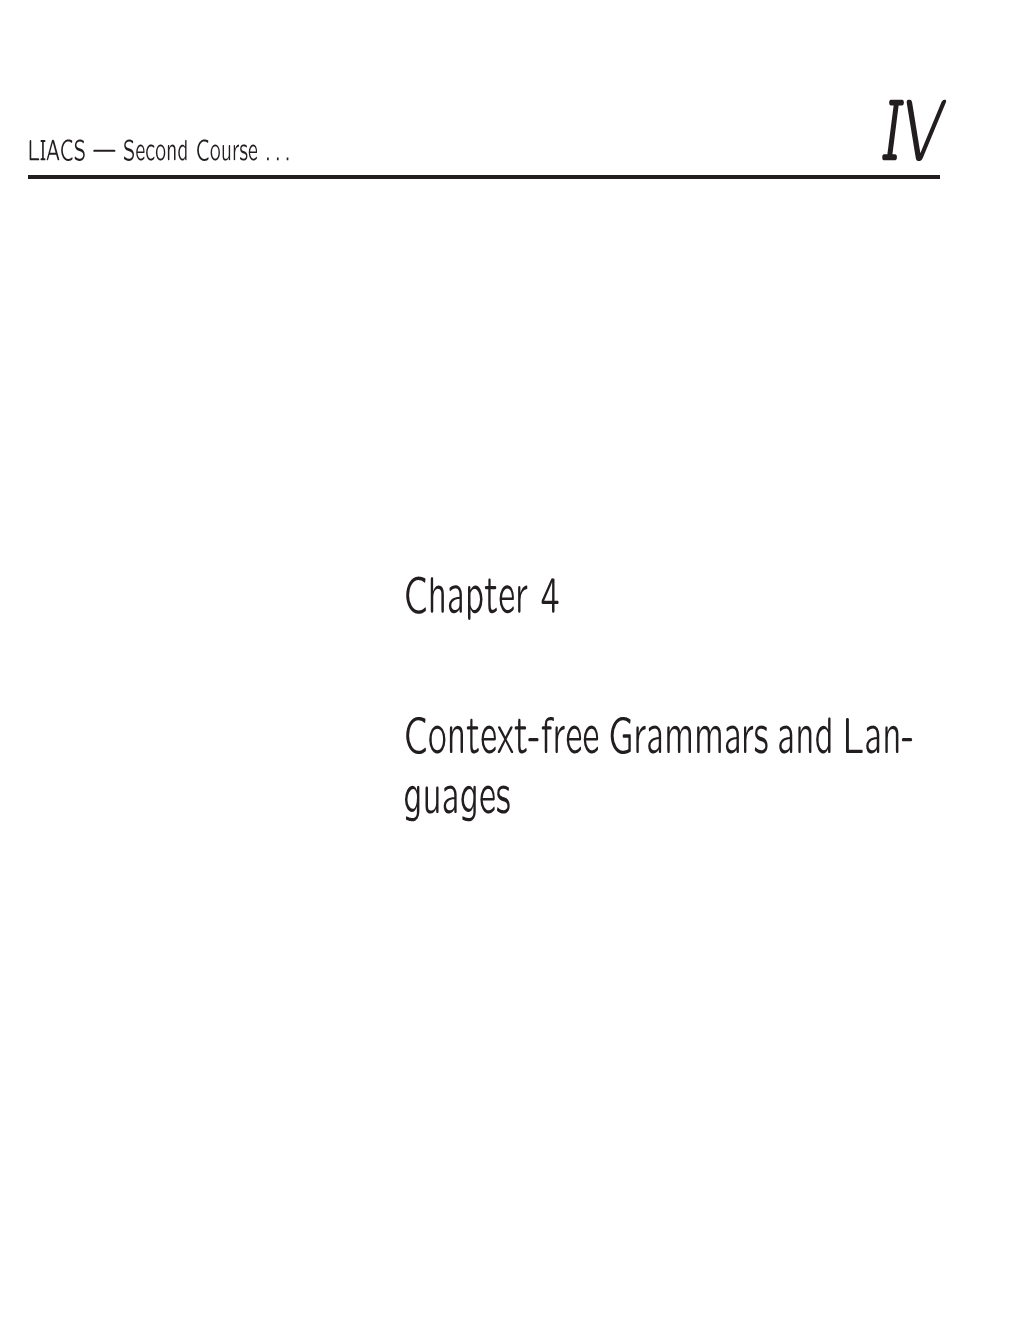 Chapter 4 Context-Free Grammars And